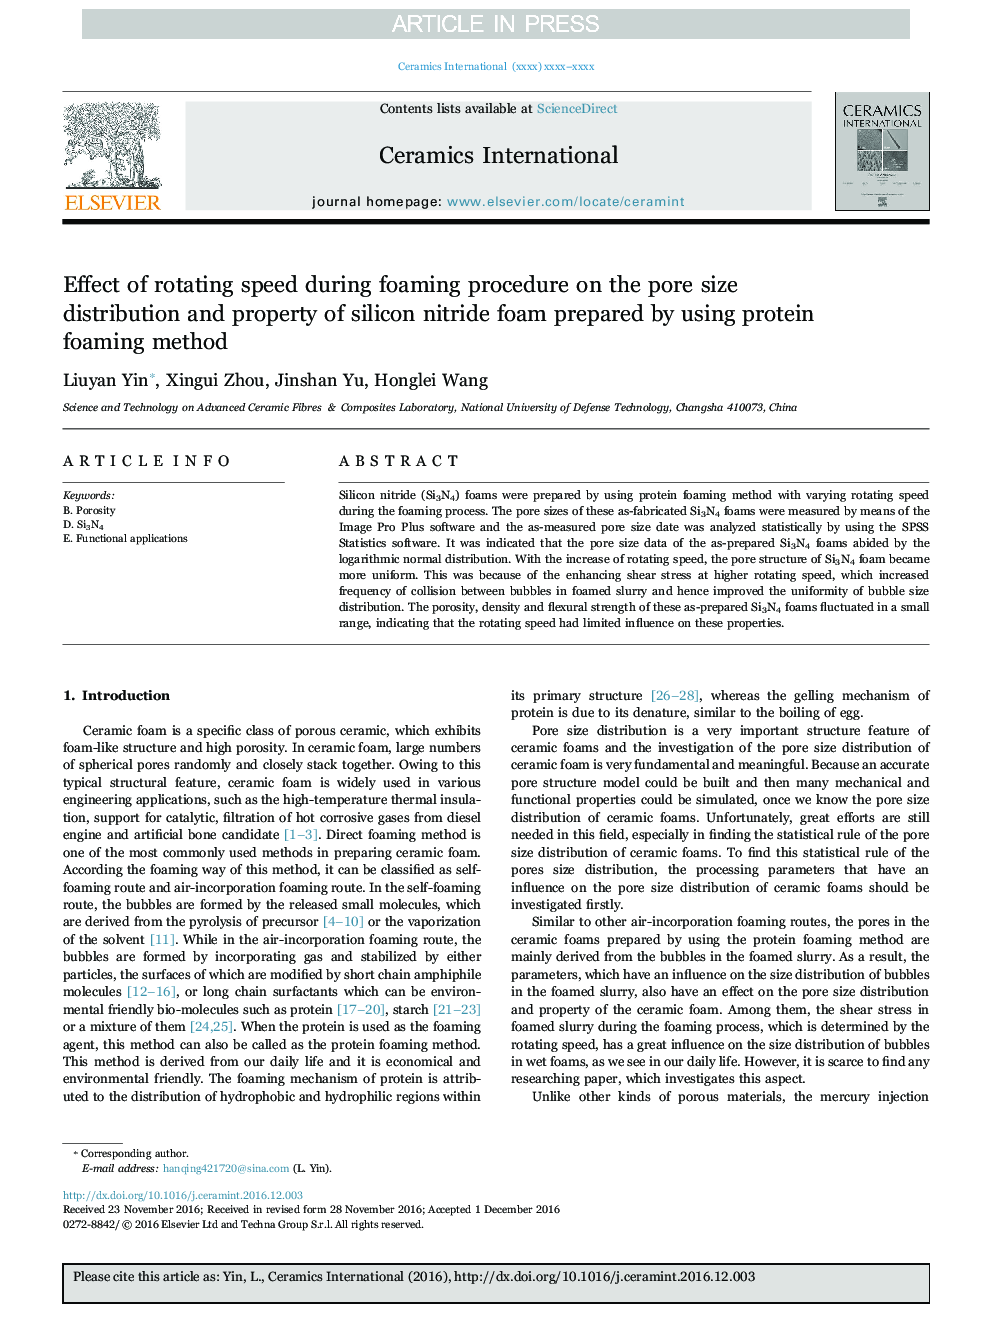 Effect of rotating speed during foaming procedure on the pore size distribution and property of silicon nitride foam prepared by using protein foaming method